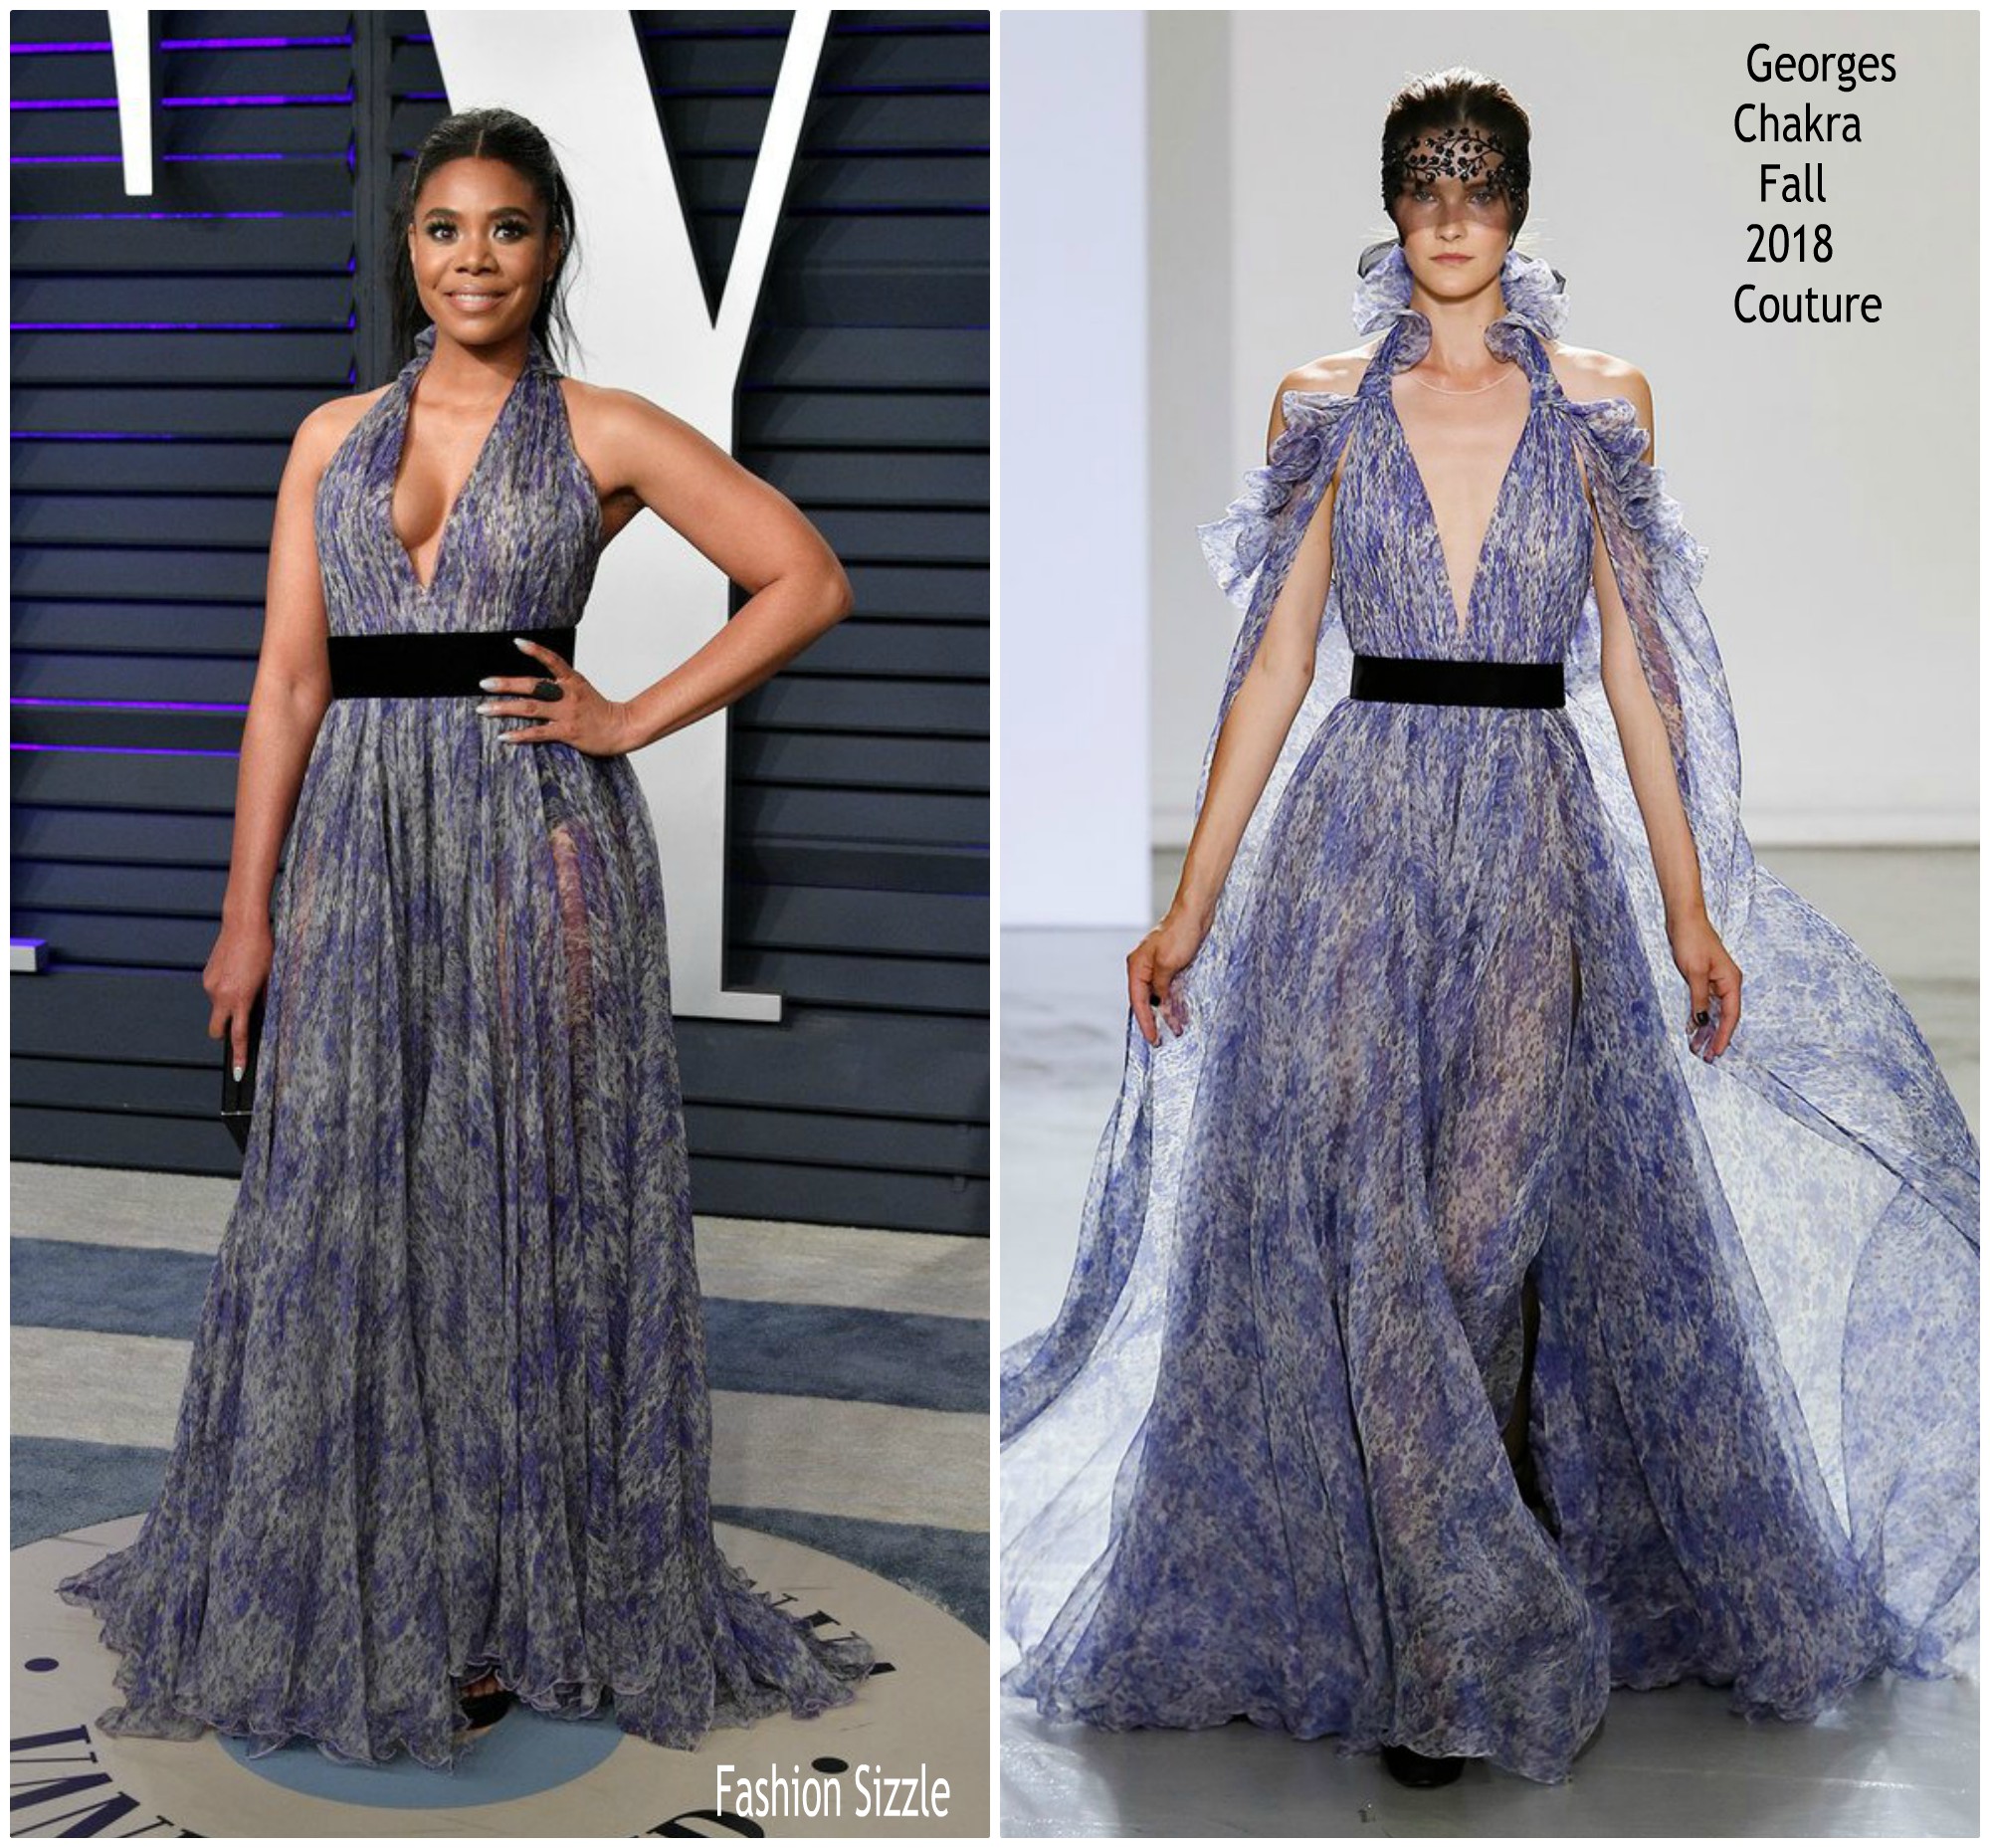 regina-hall-in-georges-chakra-couture-2019-vanity-ffair-oscar-party